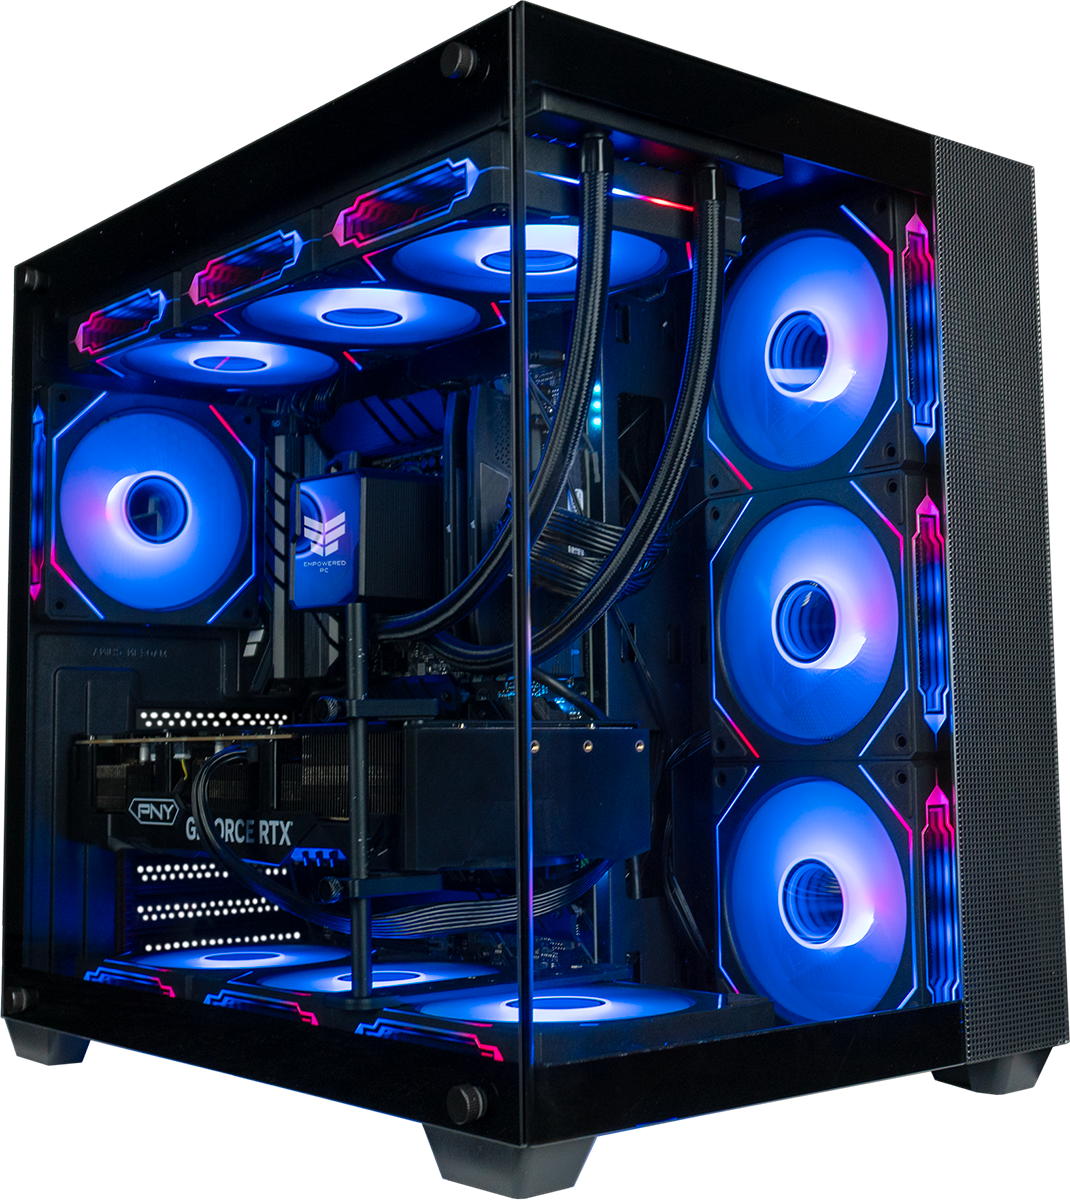 The Panorama 4080 super prebuilt pc by Empowered PC perform like gaming pc builds from ABS PC to Asus gaming PC